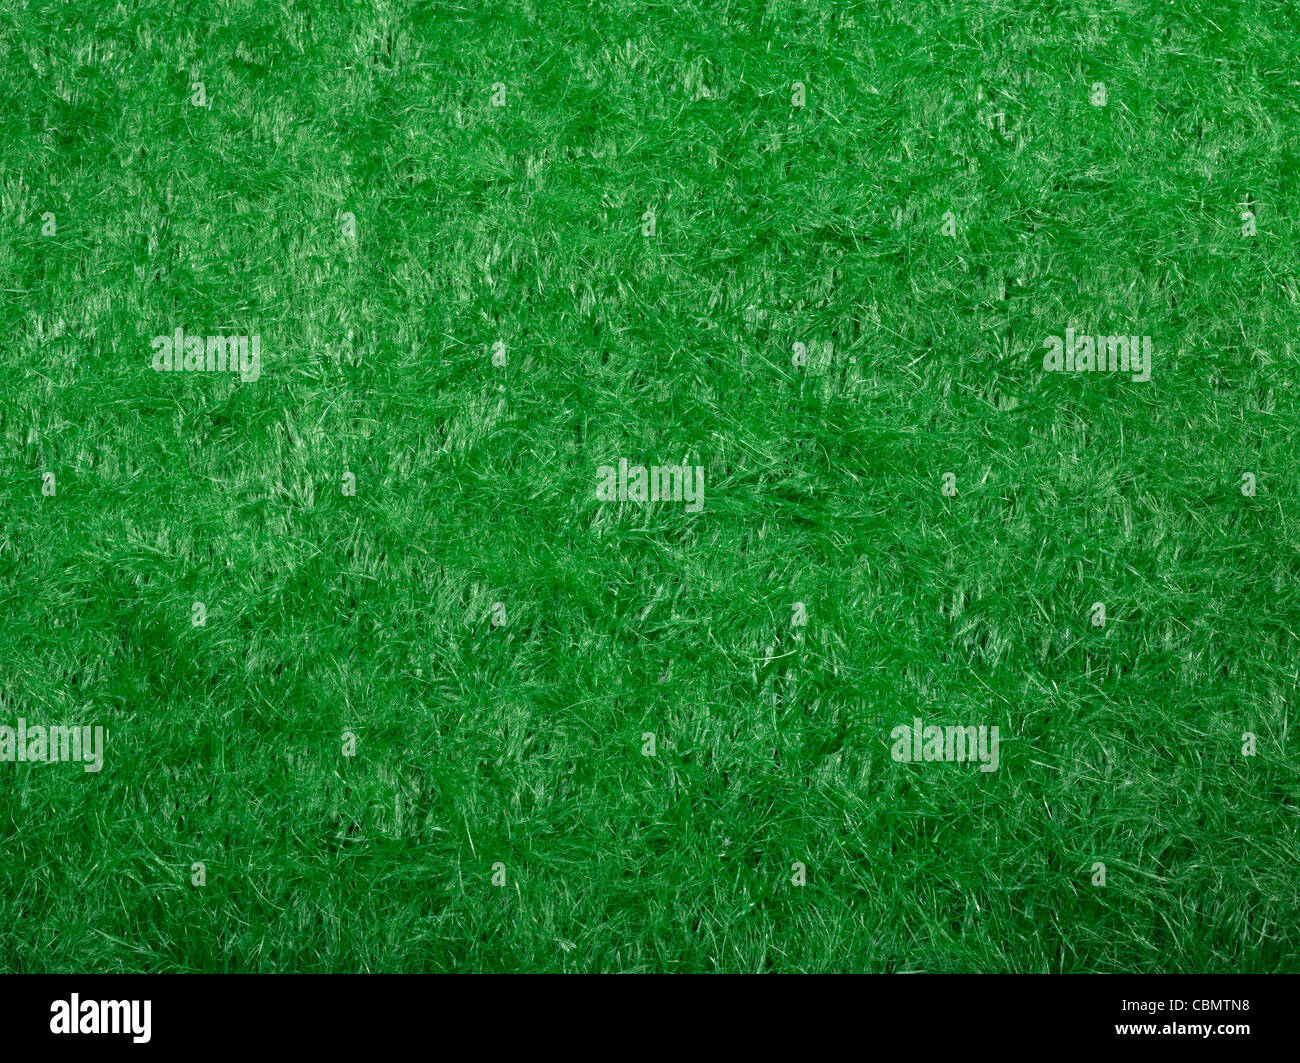 Textured fake grass for background Stock Photo